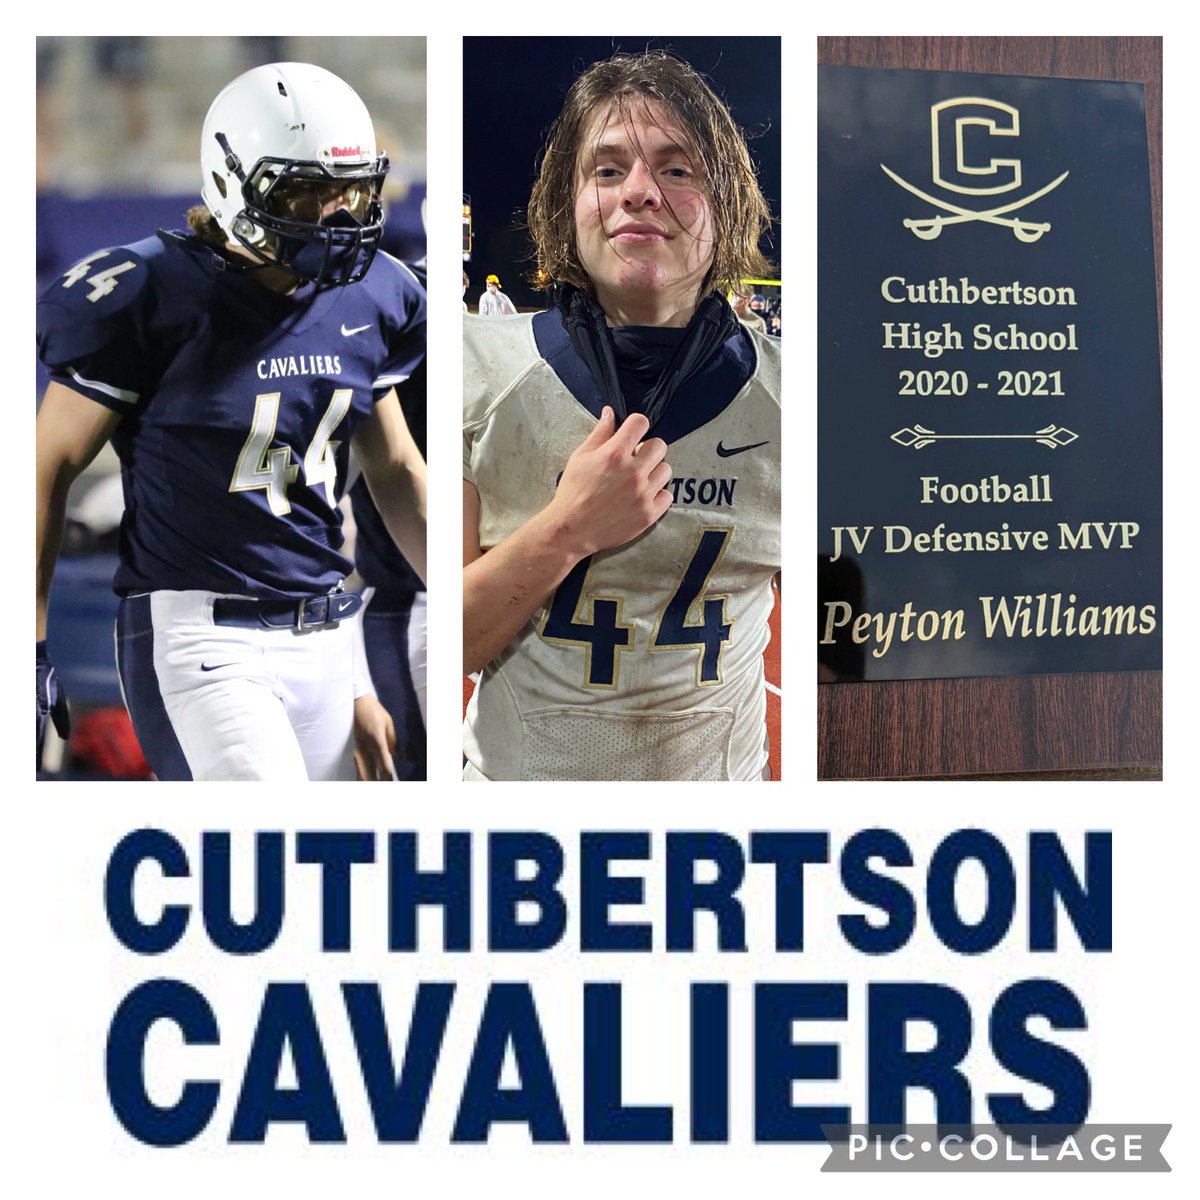 Proud of your work in the classroom, your character and commitment to football.  Blessed to be your dad and look forward to watching you grow in your junior year.  Congrats on being named Cuthbertson Football 2020-2021 JV Defensive MVP.  -#WorkHard #wintheday #serveothersfirst